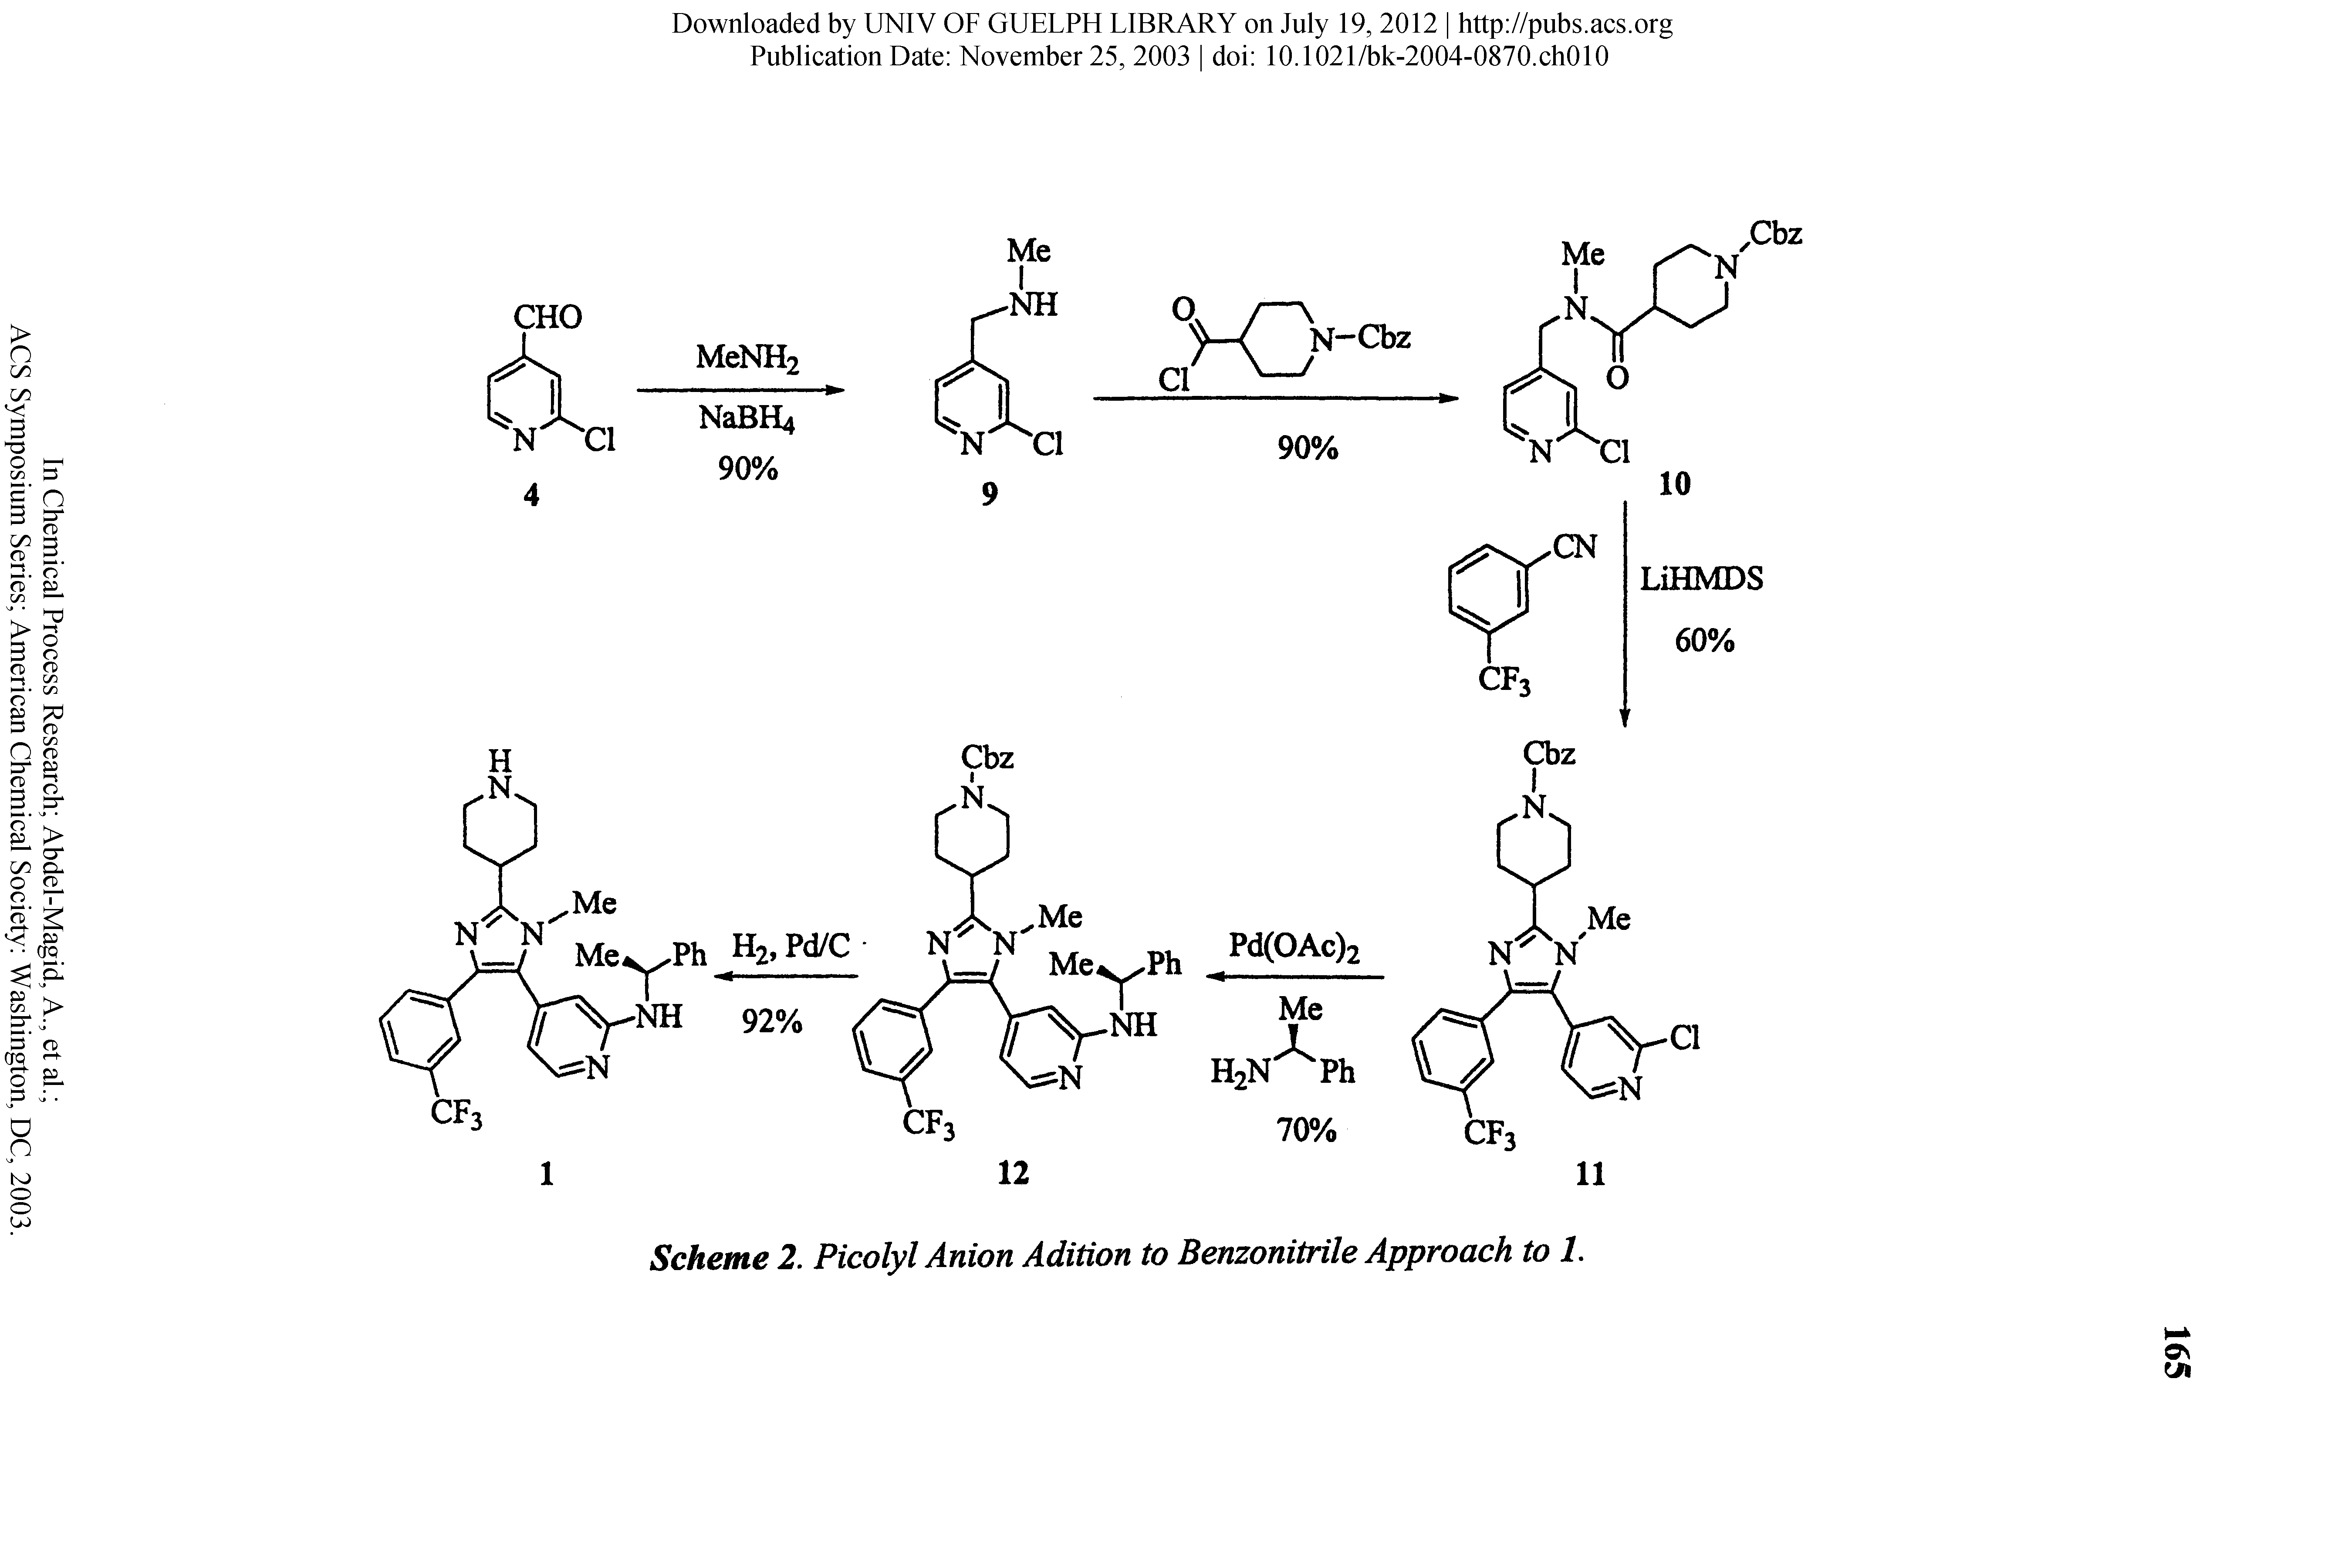 Scheme 2. Picolyl Anion Adition to Benzonitrile Approach to 1.